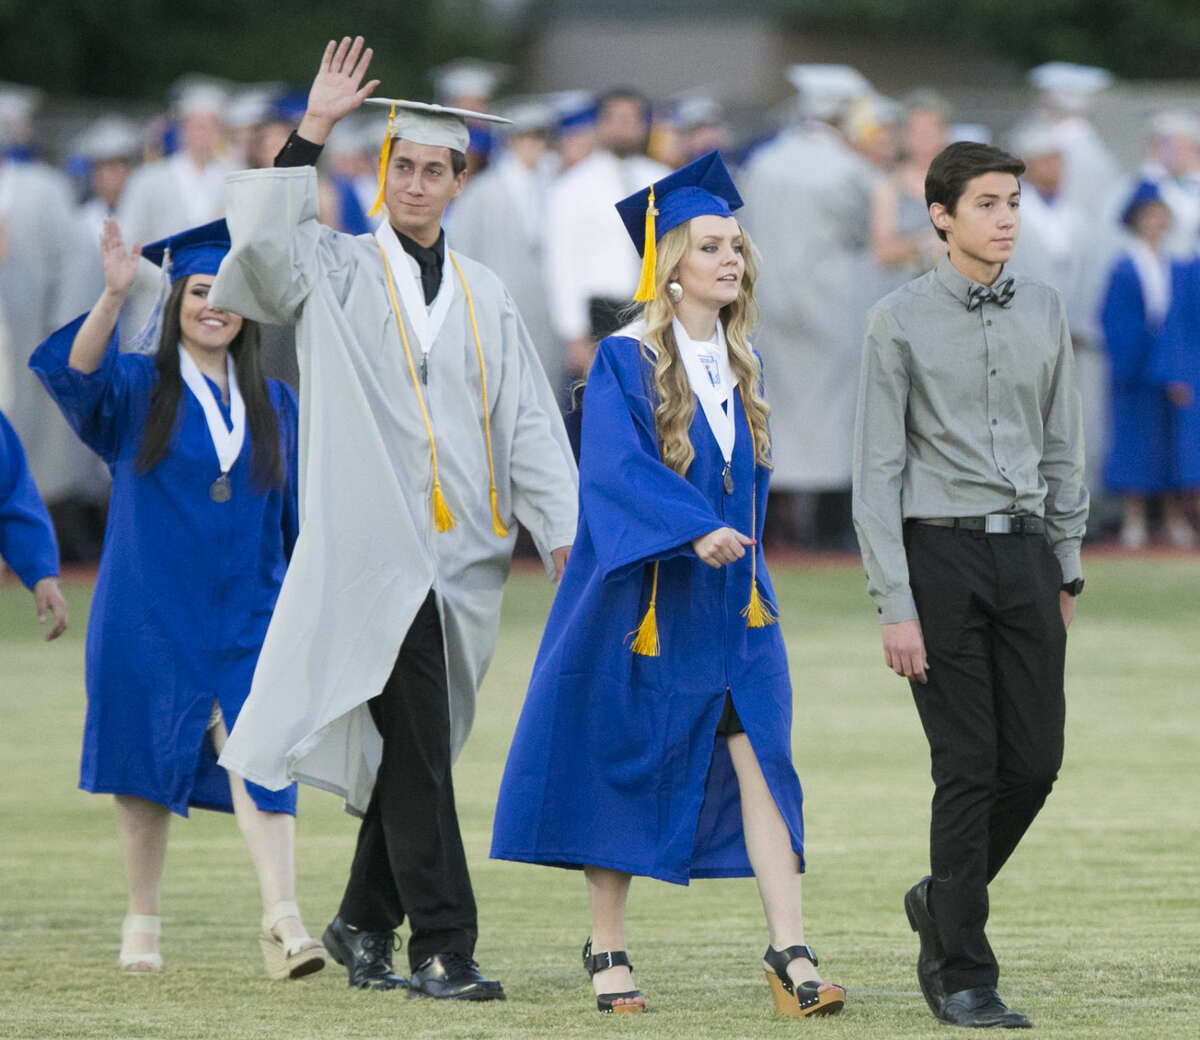 In this photo taken, Thursday evening, May 26, 2016, Stephen Dwyer, right, who could not wear a cap and gown nor sit with his classmates, leads graduates during the Dobson High School graduation in Mesa Ariz. Dwyer, who withdrew from classes his junior year to receive a lifesaving bone-marrow transplant to treat high-risk leukemia, returned for classes his senior year and he worked to catch. He is only 2.5 credits short of meeting the requirements to graduate from Dobson. He expects to graduate in December. The school and the Mesa Public Schools district officials said Dwyer may not wear his cap and gown, but can lead the Class of 2016 out at the beginning of the ceremony.(David Wallace/The Arizona Republic via AP) MARICOPA COUNTY OUT; MAGS OUT; NO SALES; MANDATORY CREDIT